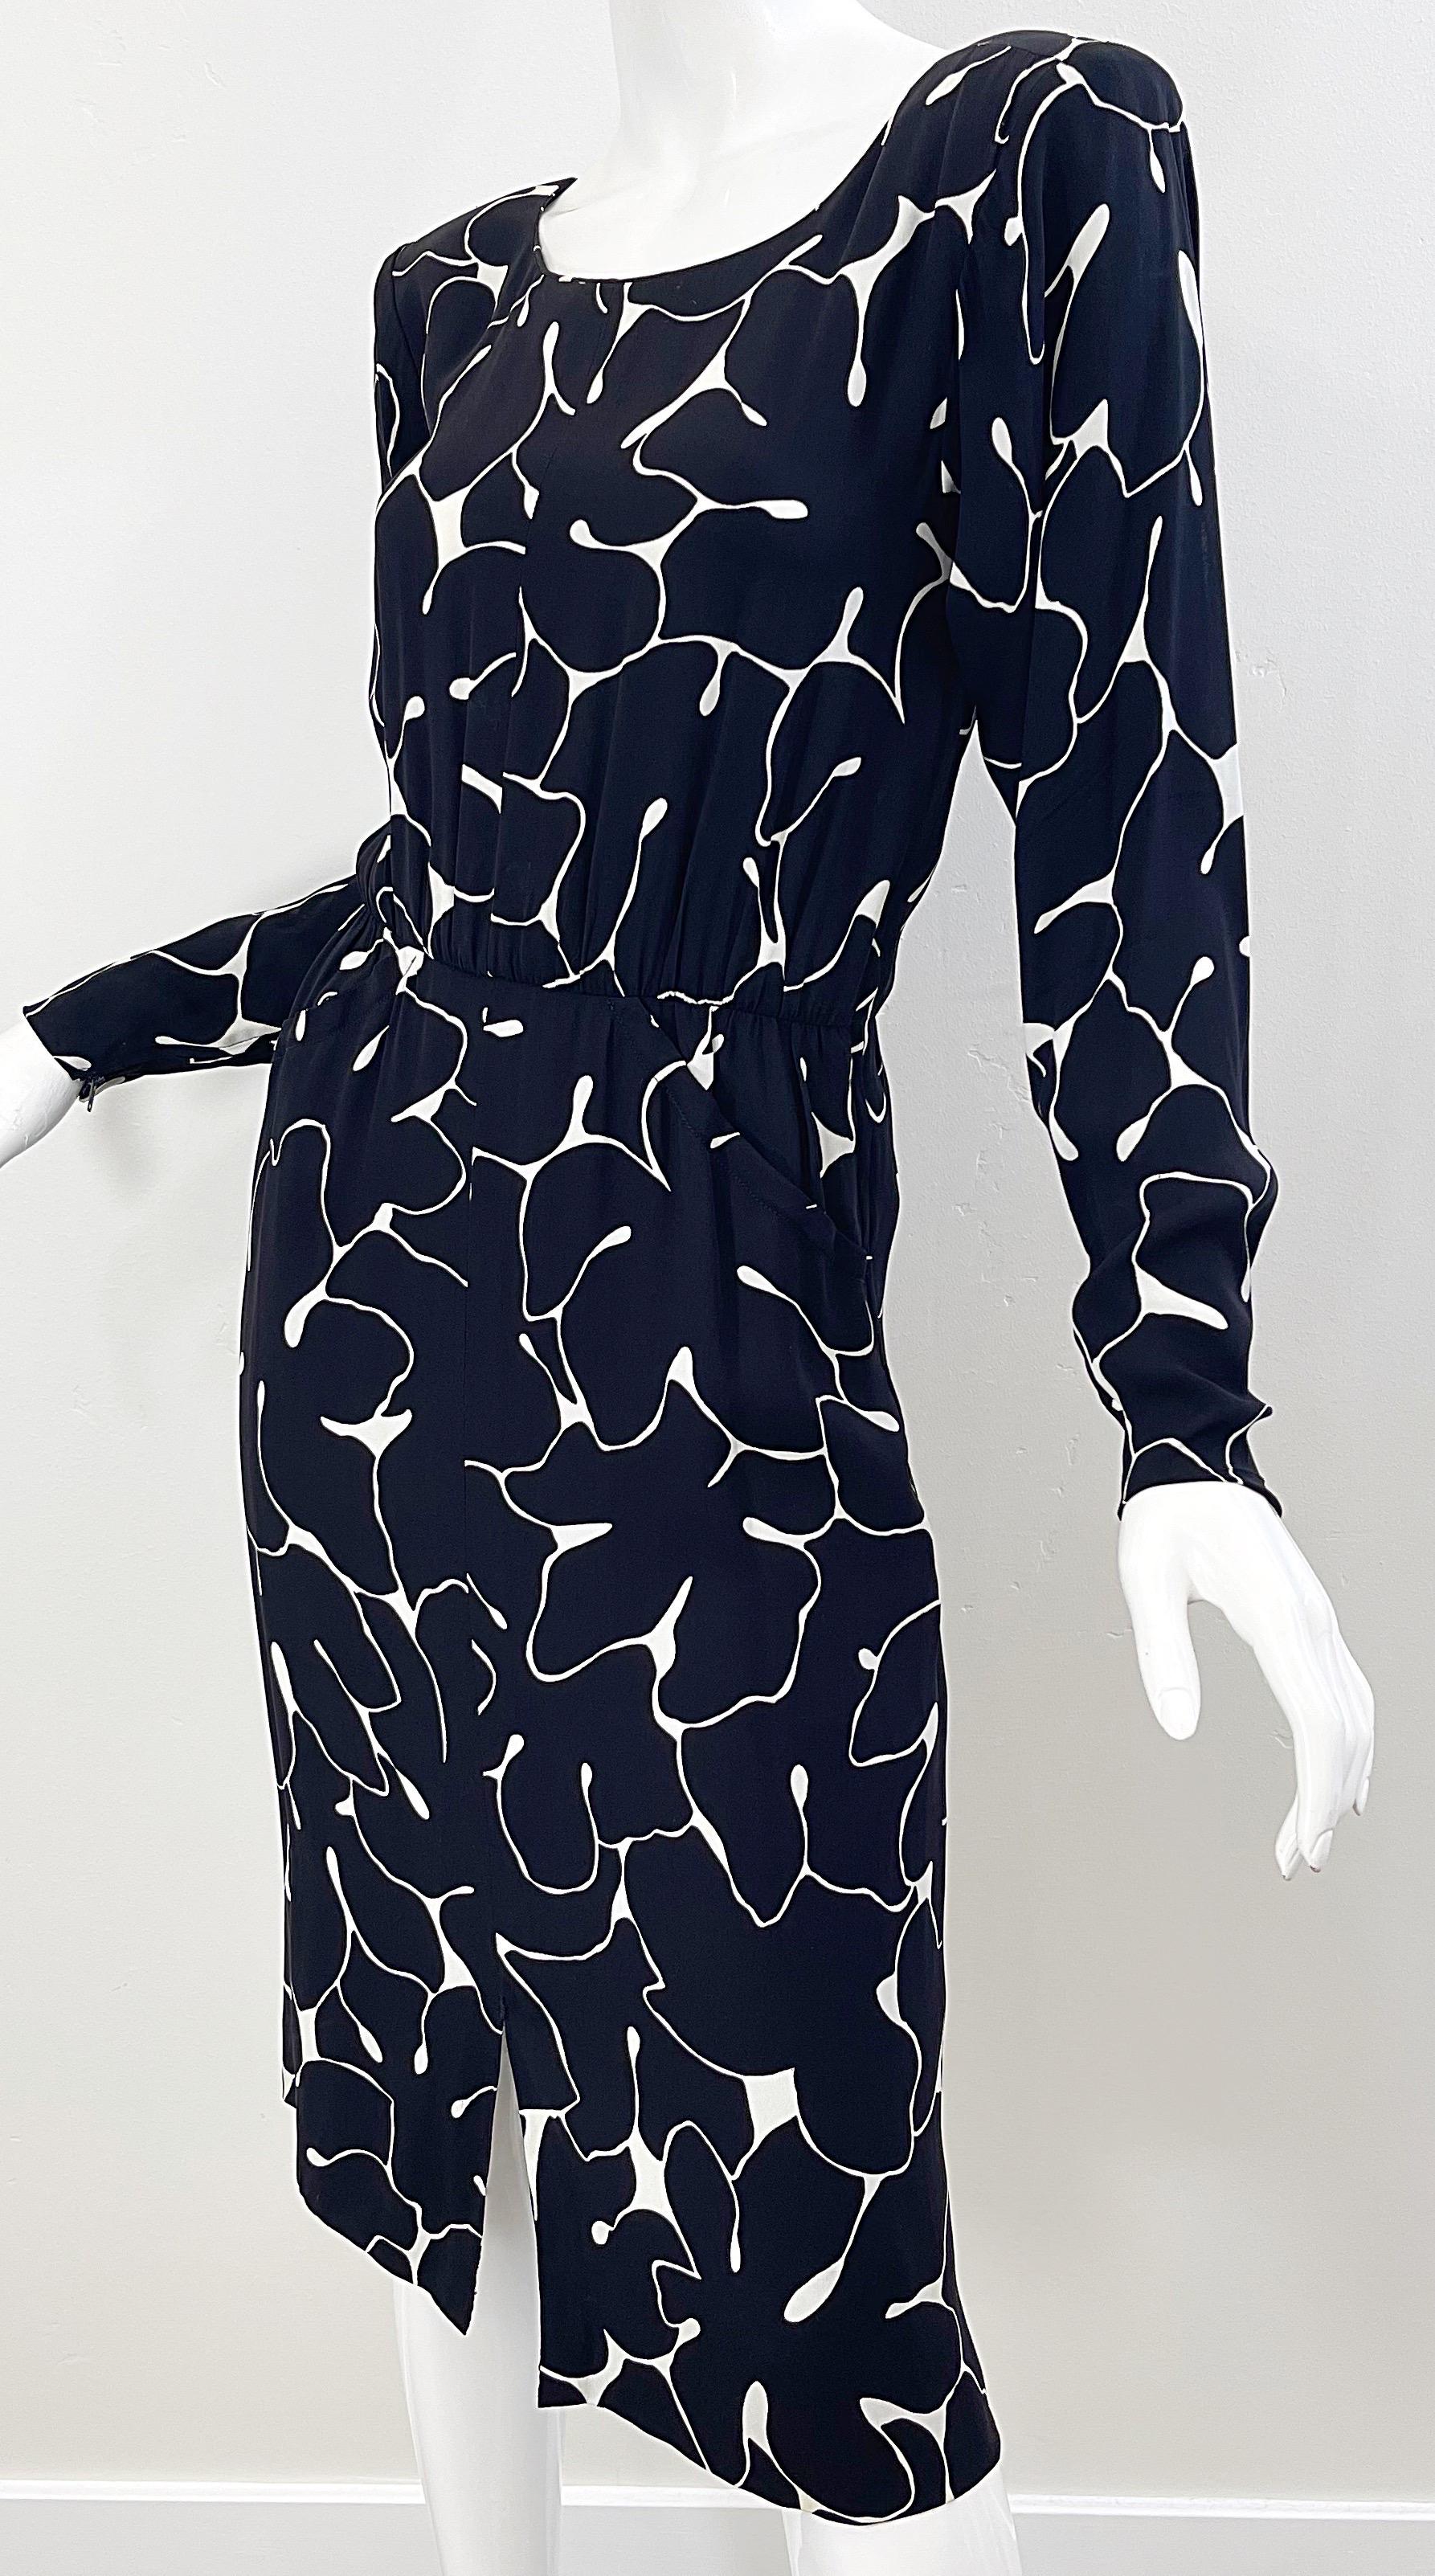 Yves Saint Laurent 1980s Black and White Abstract Flower Print Silk Crepe Dress For Sale 8